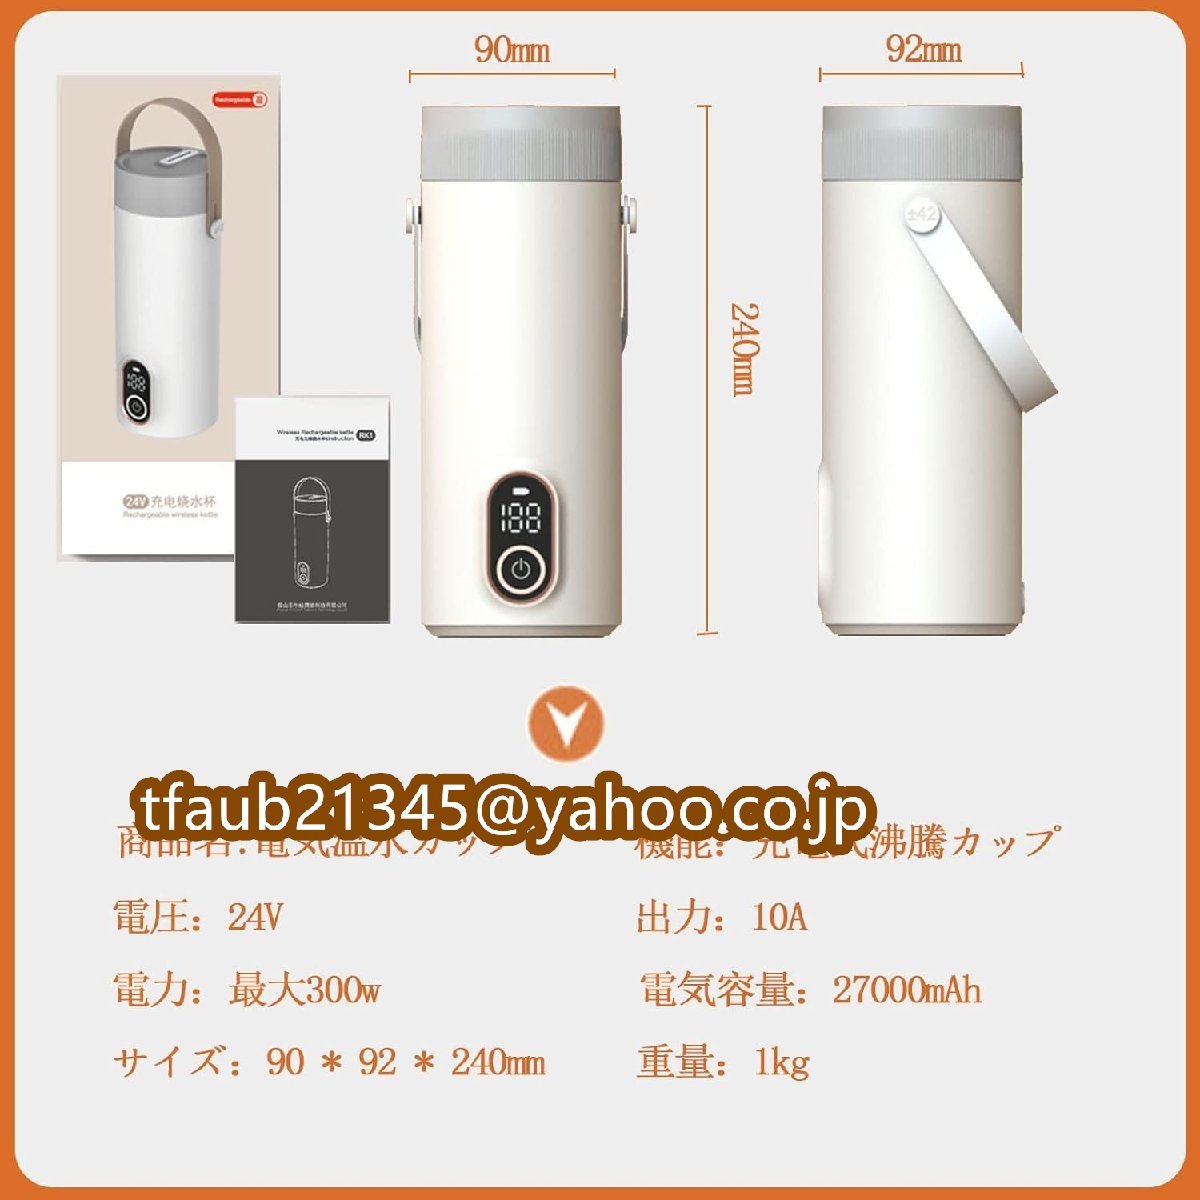  wireless portable rechargeable .. water cup, electric hot water cup, travel cup,300W sudden speed heating,27000 mAh high capacity,400ml Smart insulation pot 